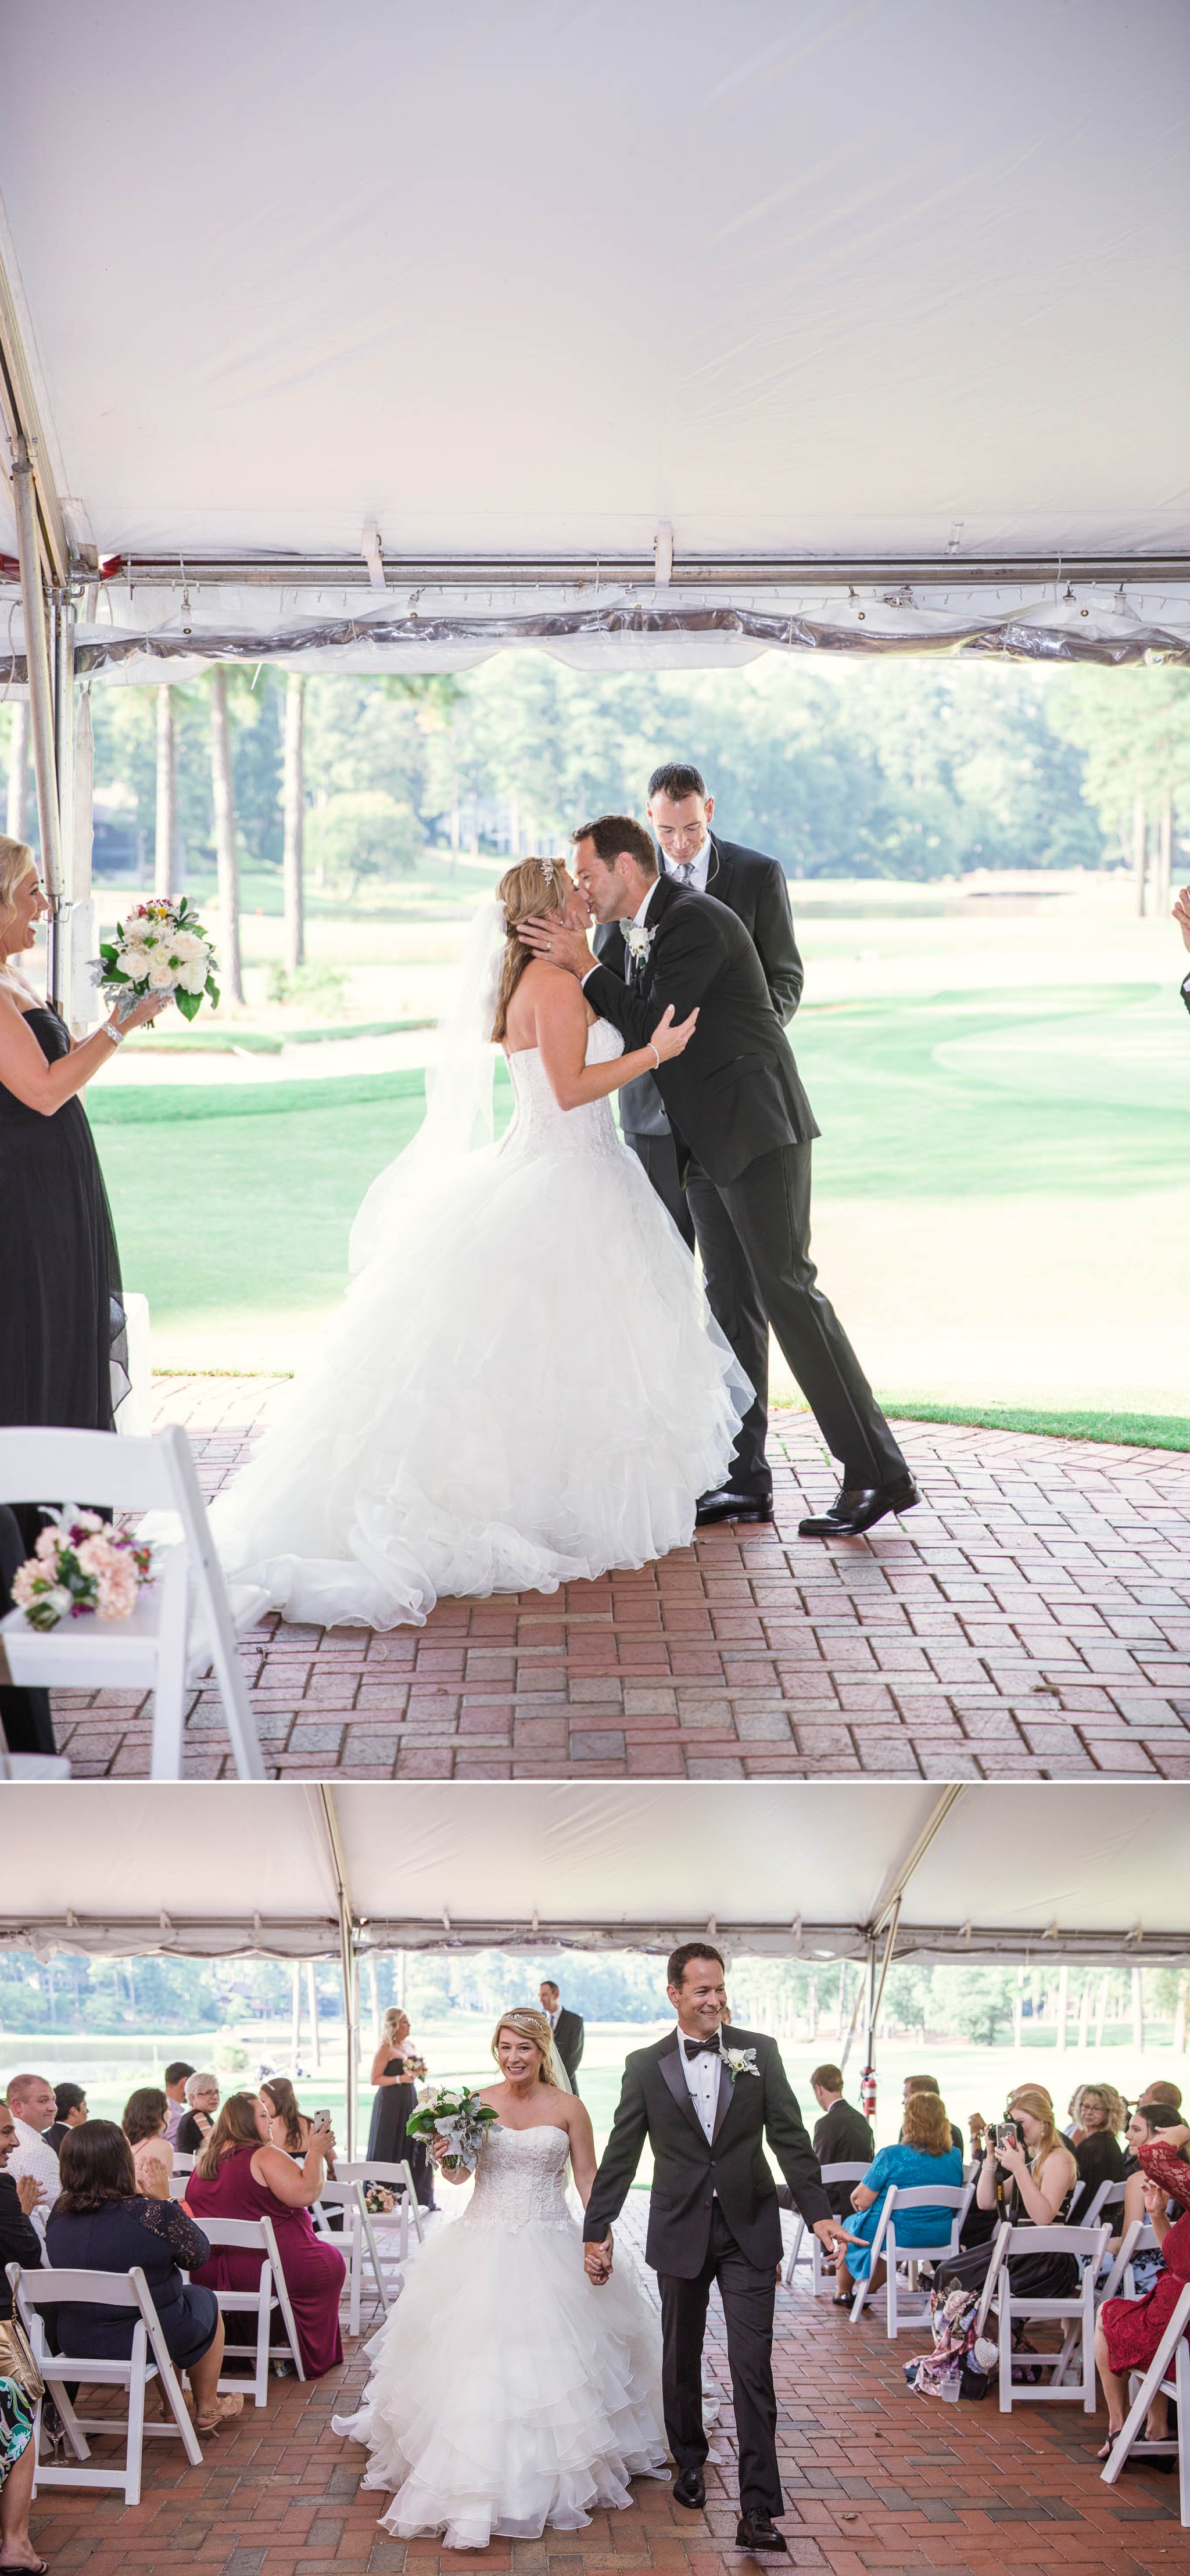 First Kiss - Dona + Doug - MacGregor Downs Country Club in Cary, NC - Raleigh Wedding Photographer